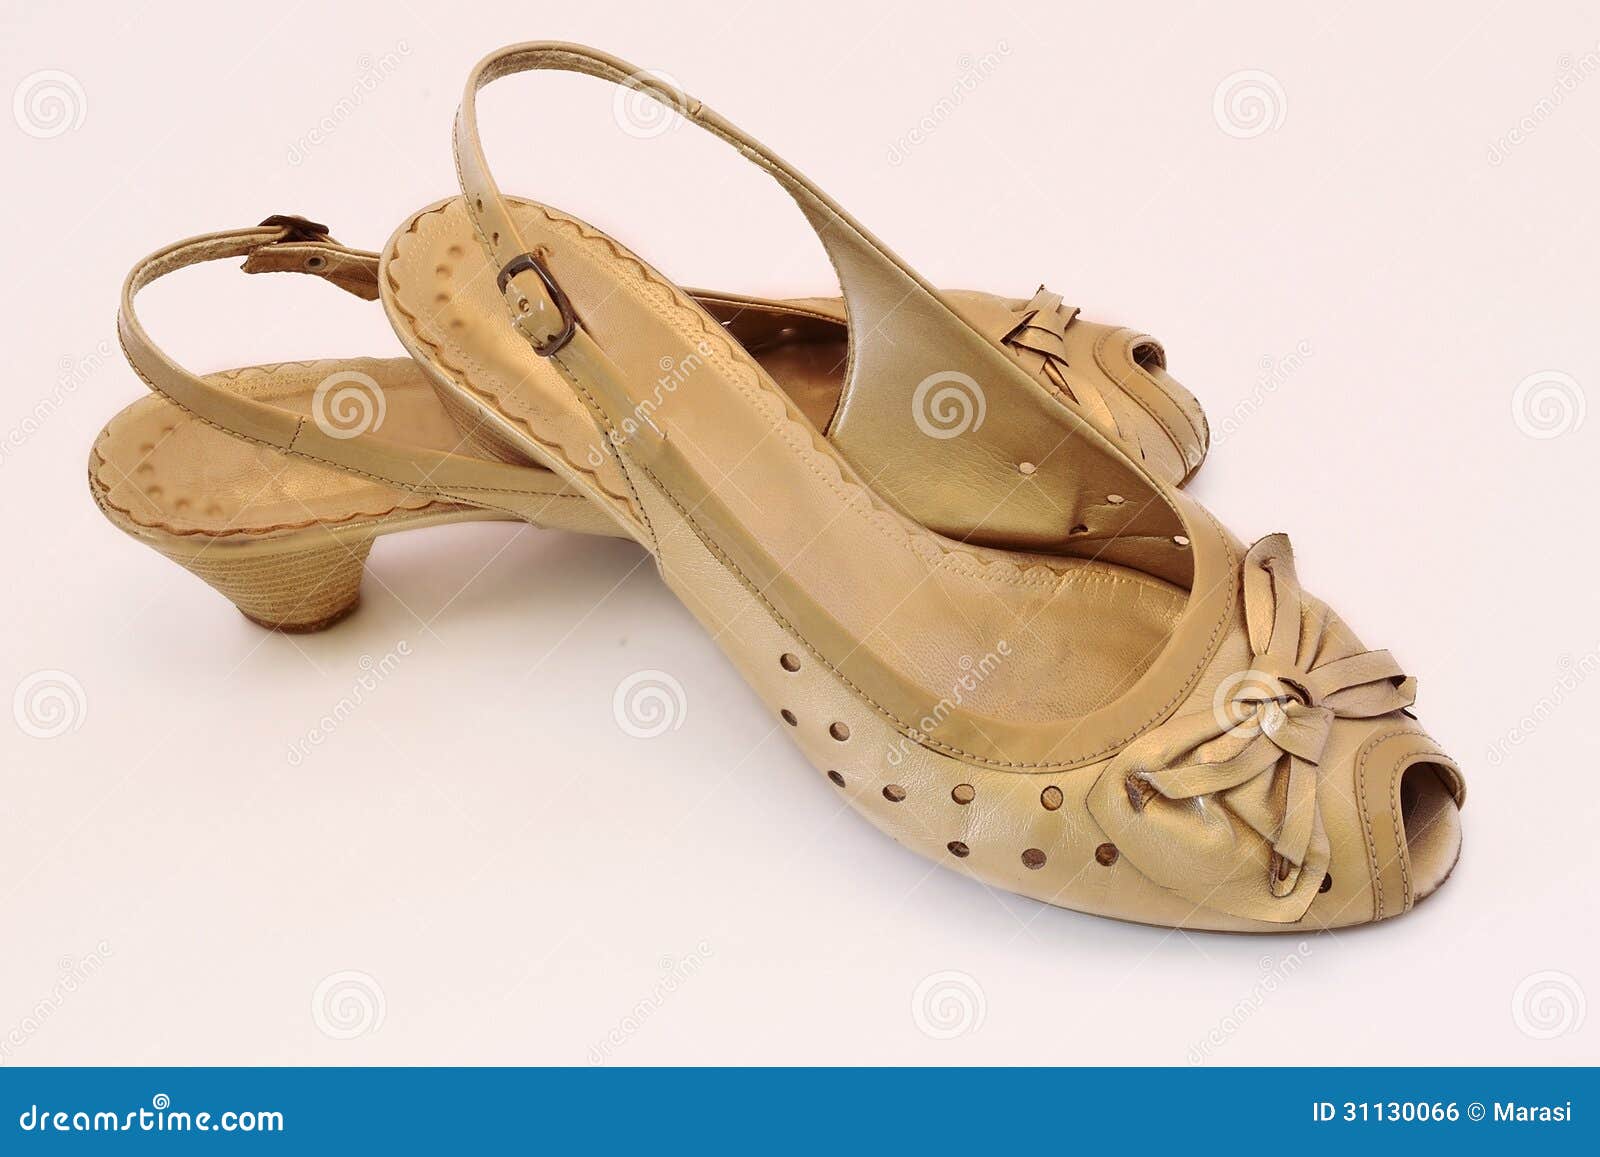 Gold shoes for women stock photo. Image of female, high - 31130066